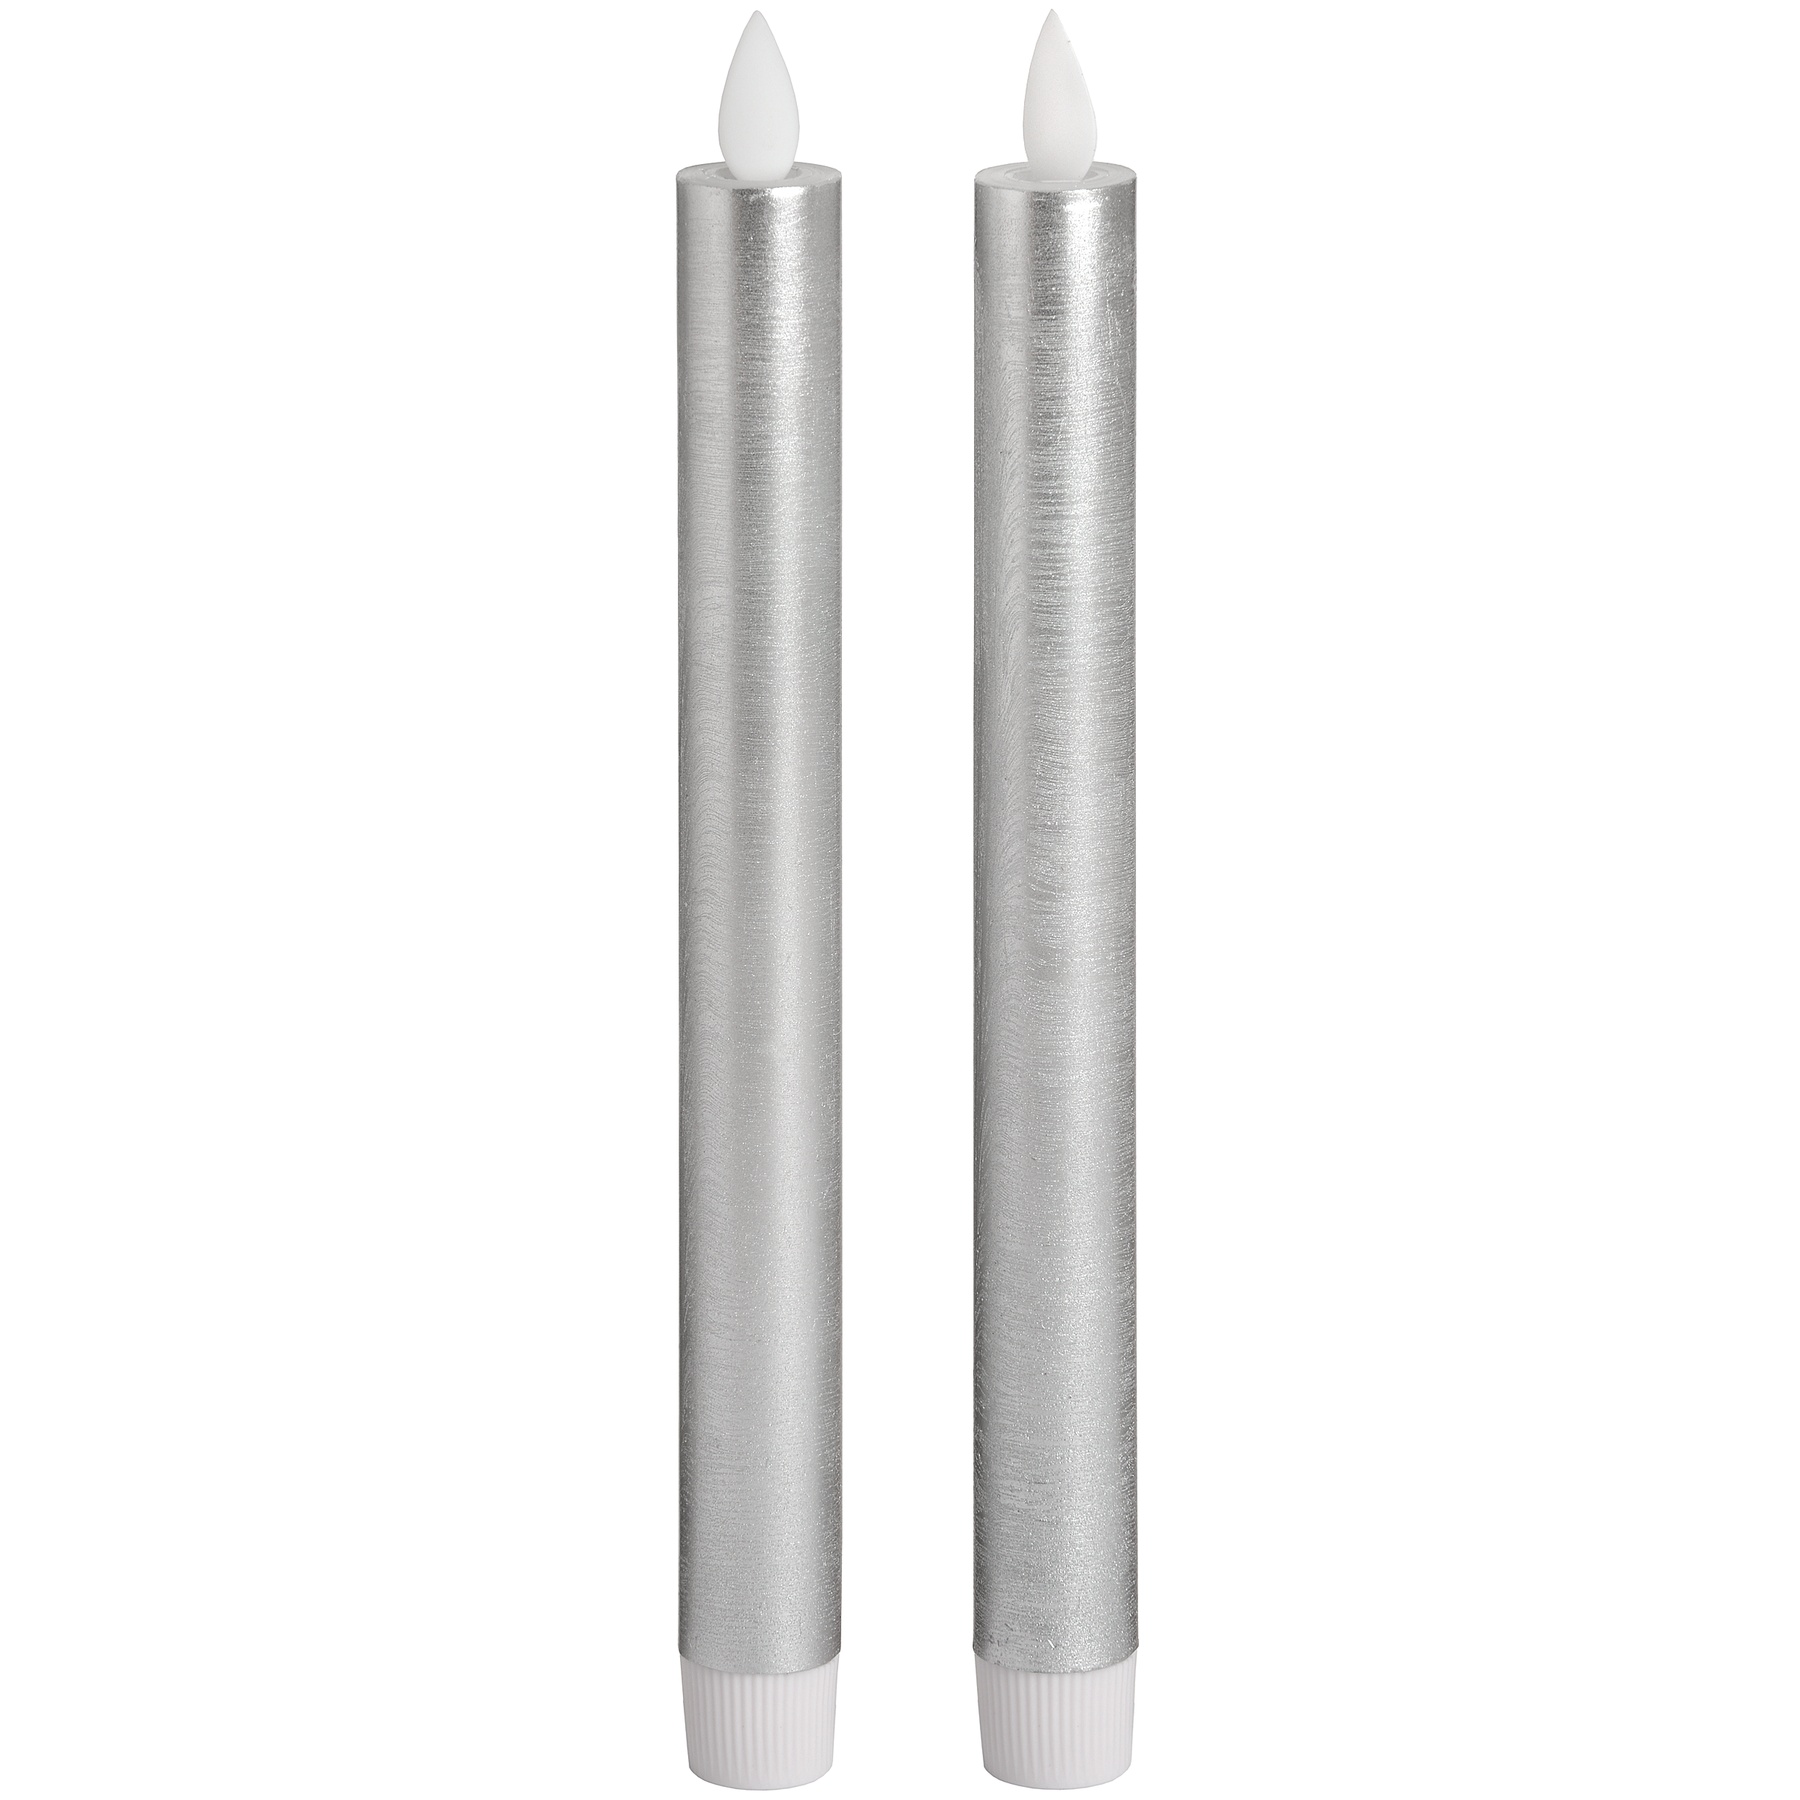 Pair Of Silver Luxe Flickering Flame LED Wax Dinner Candles